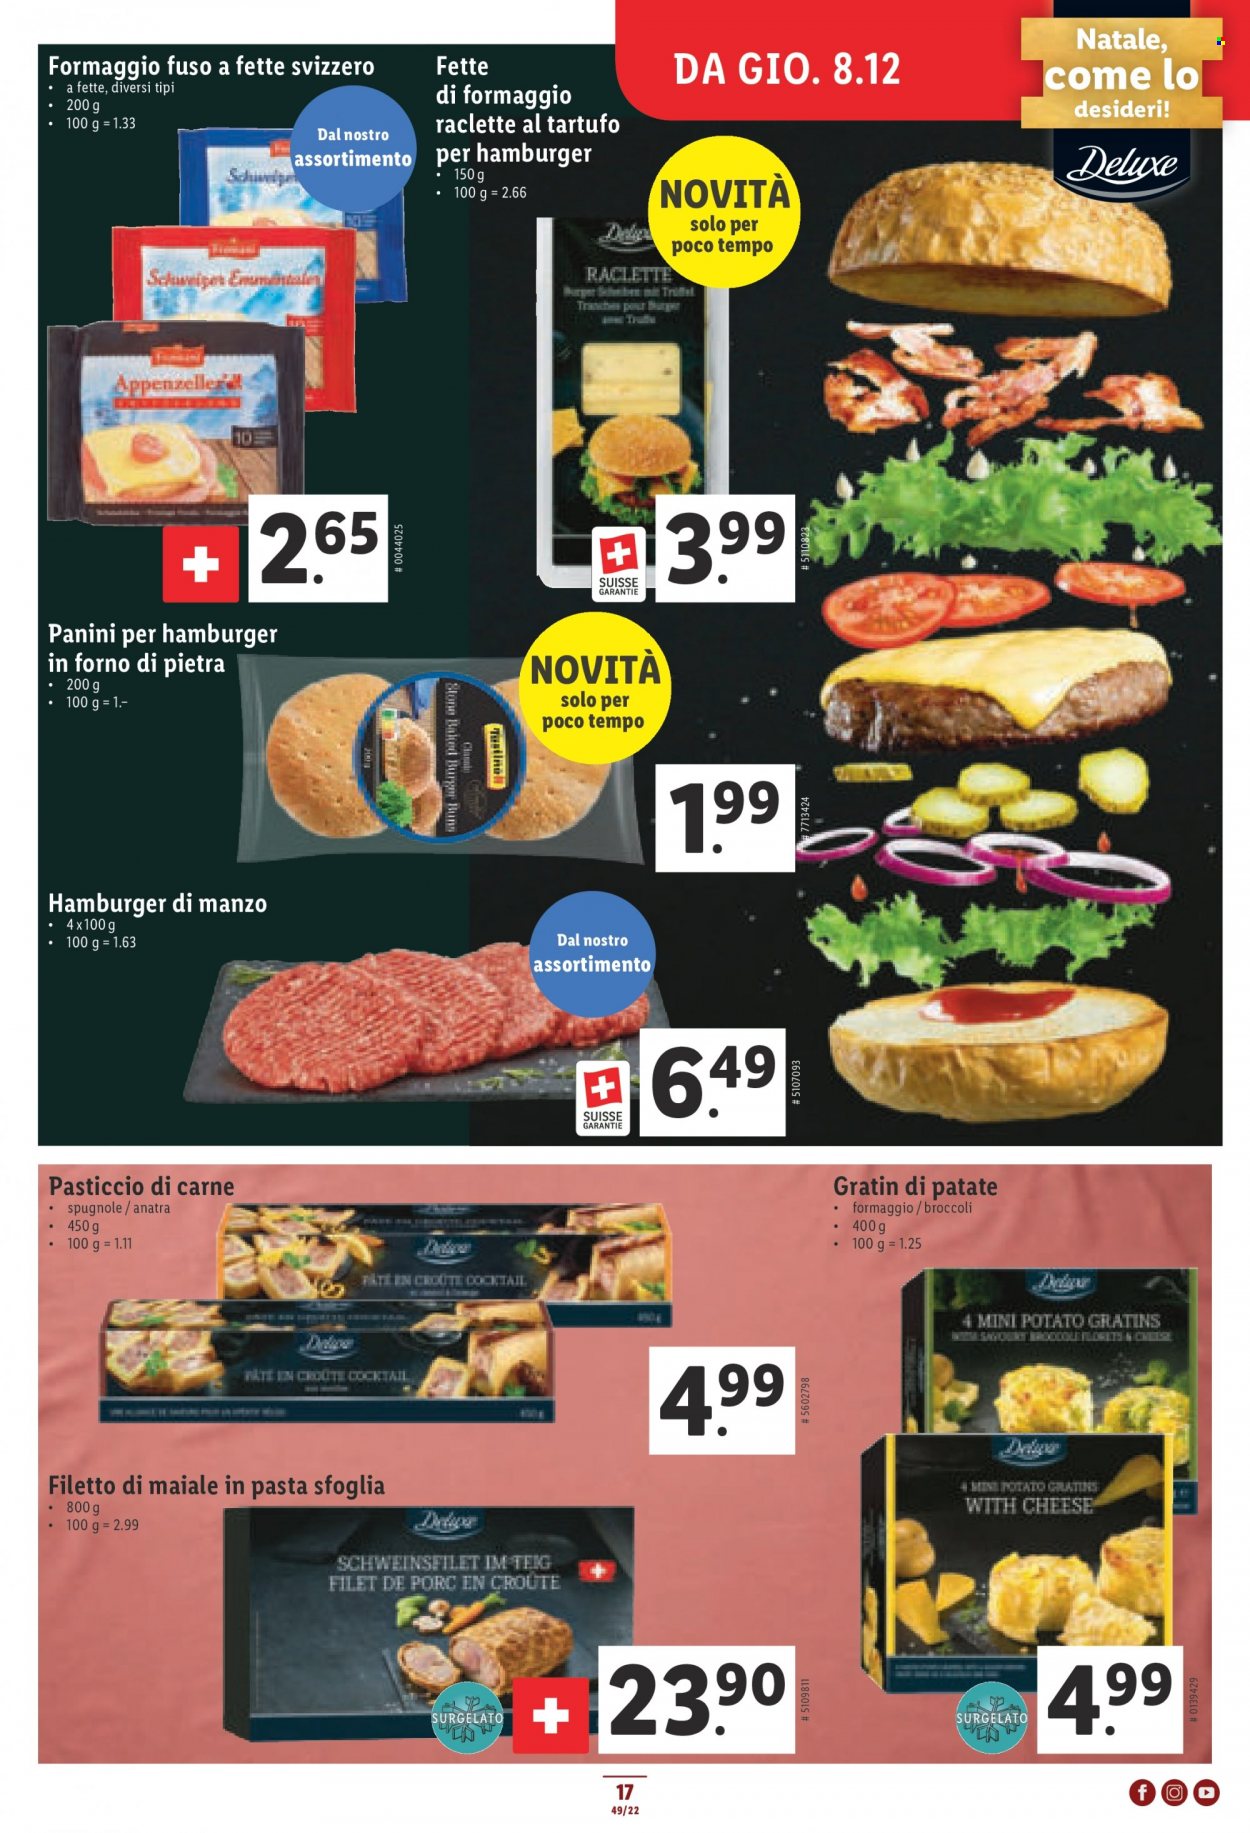 Catalogue Lidl - 8.12.2022 - 14.12.2022. Page 17.